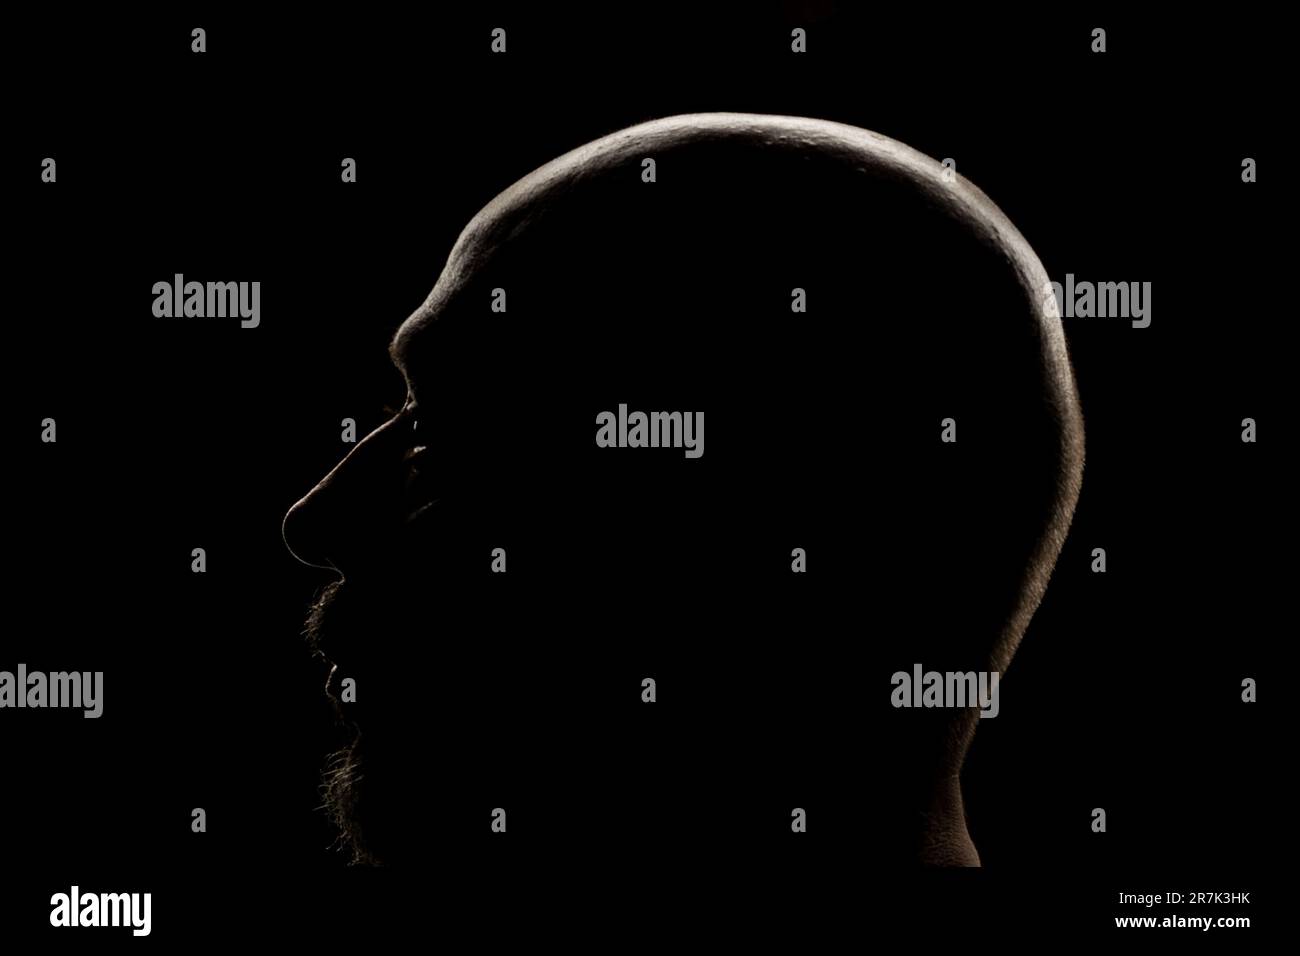 Silhouette of a man head in backlight. Low light portrait. Isolated on dark background. Stock Photo